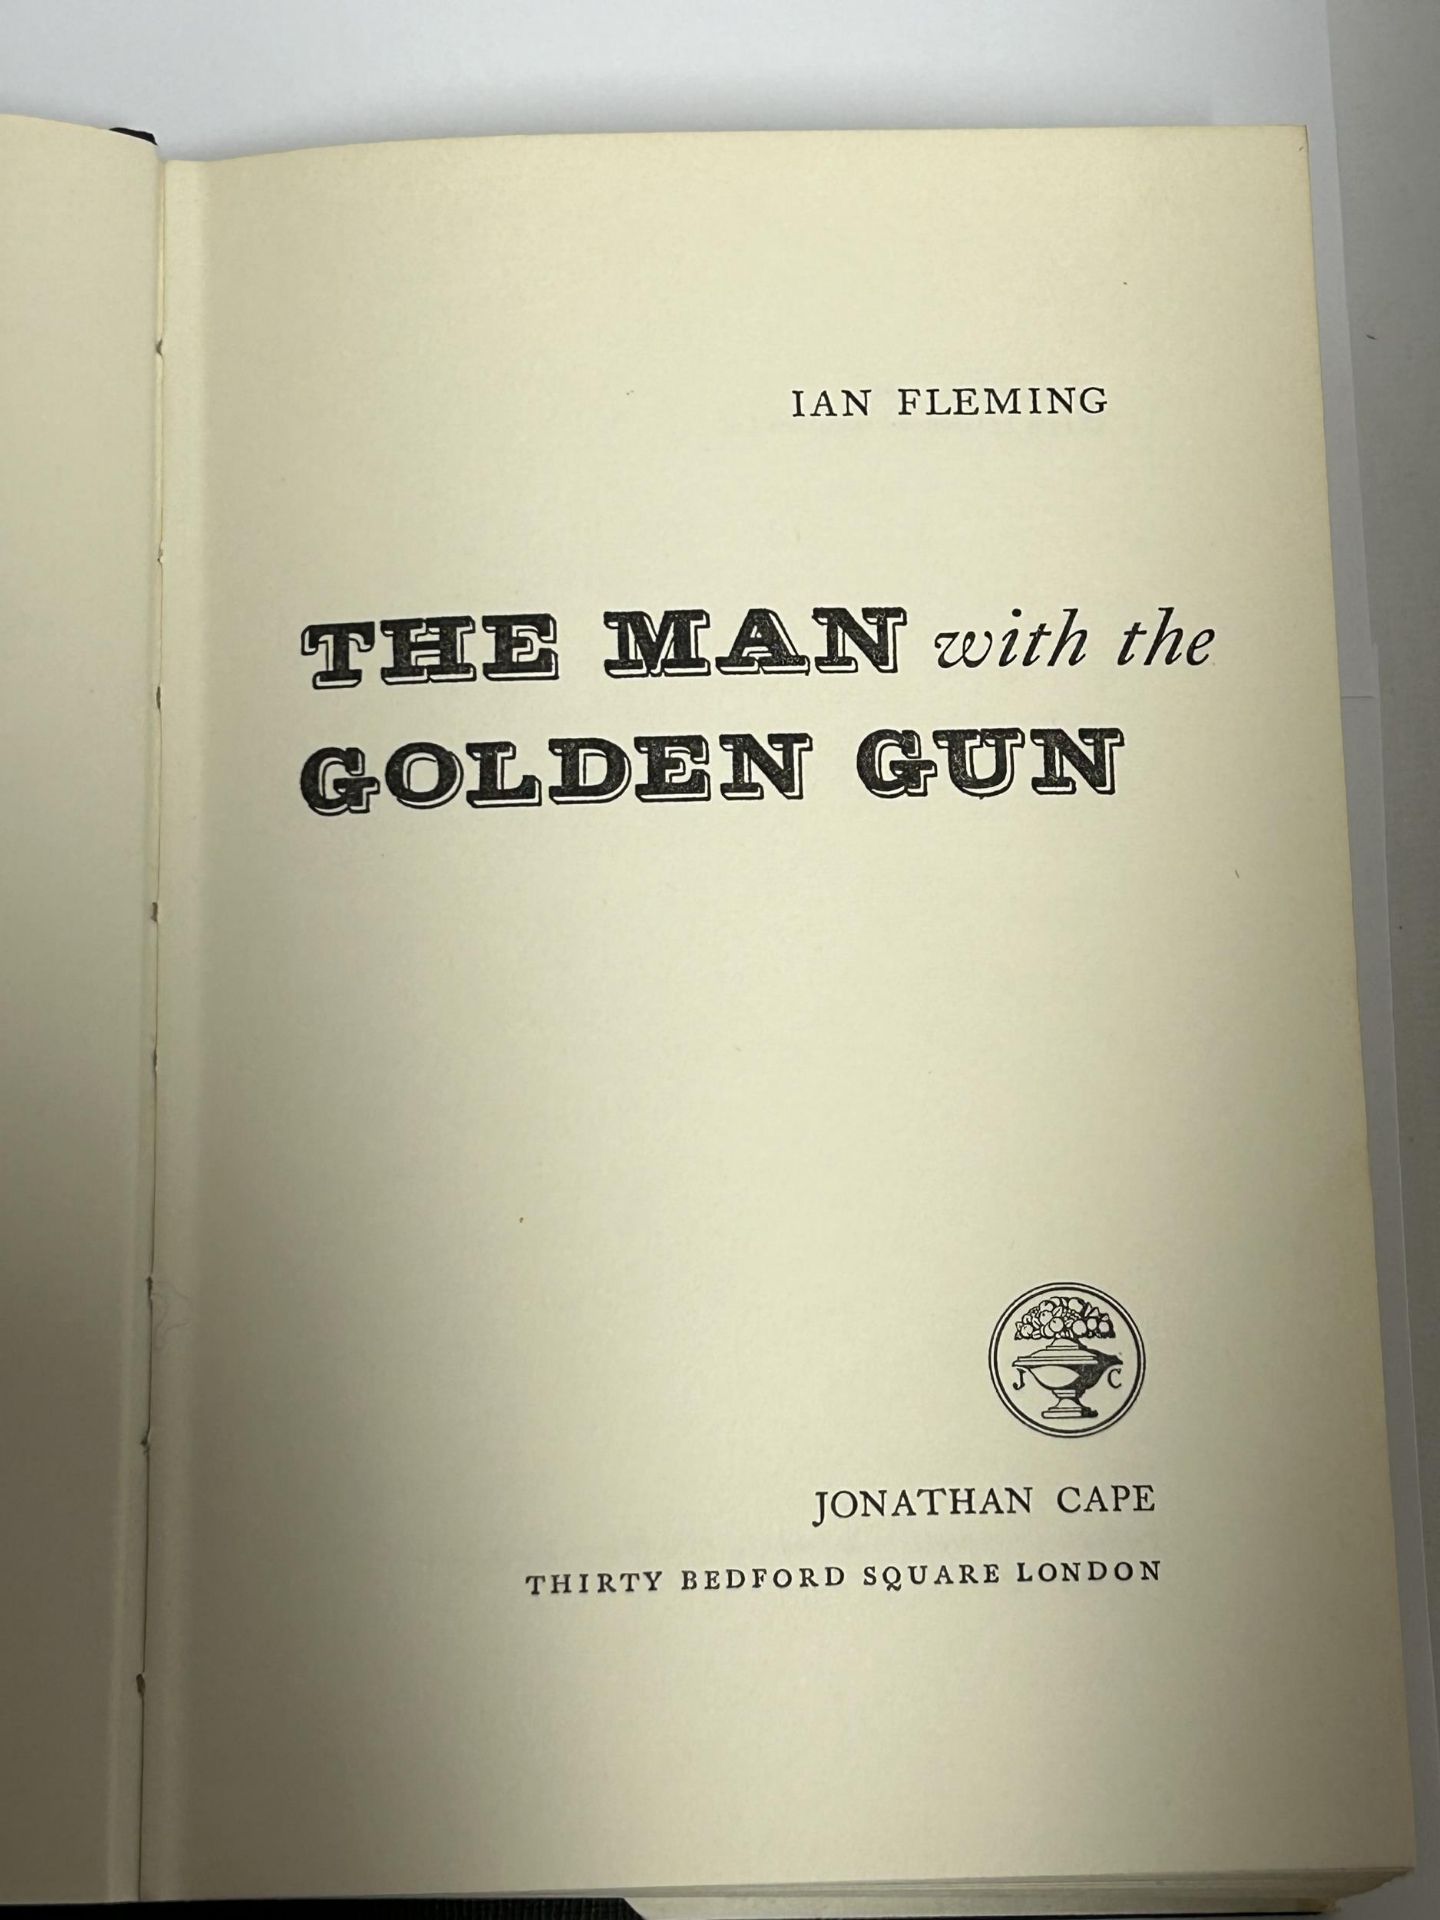 A 1965 IAN FLEMING FIRST EDITION, THE MAN WITH THE GOLDEN GUN, JAMES BOND HARDBACK BOOK COMPLETE - Image 5 of 7